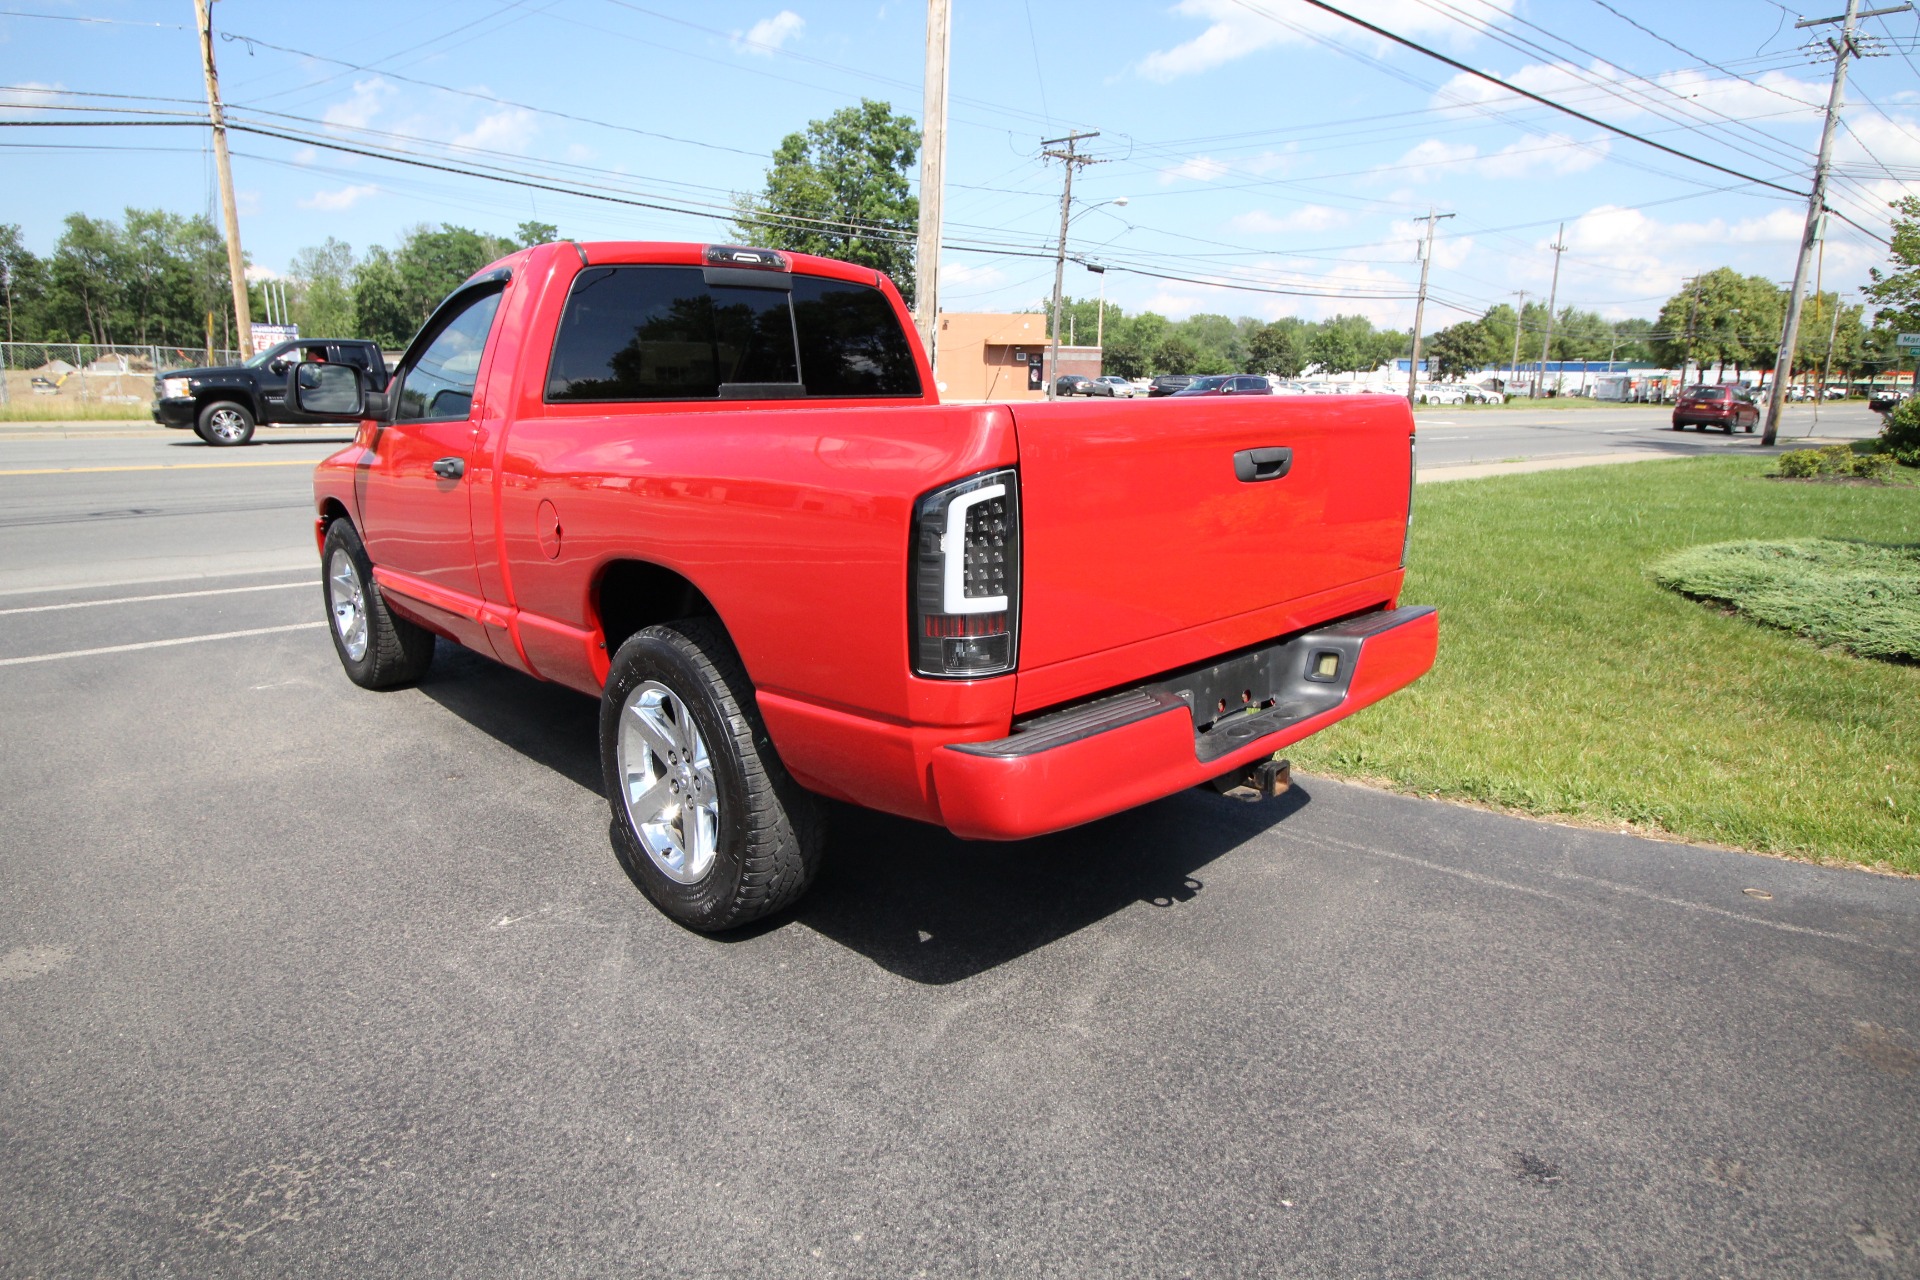 Used 2004 Flame Red Dodge Ram 1500 SLT 2WD | Albany, NY